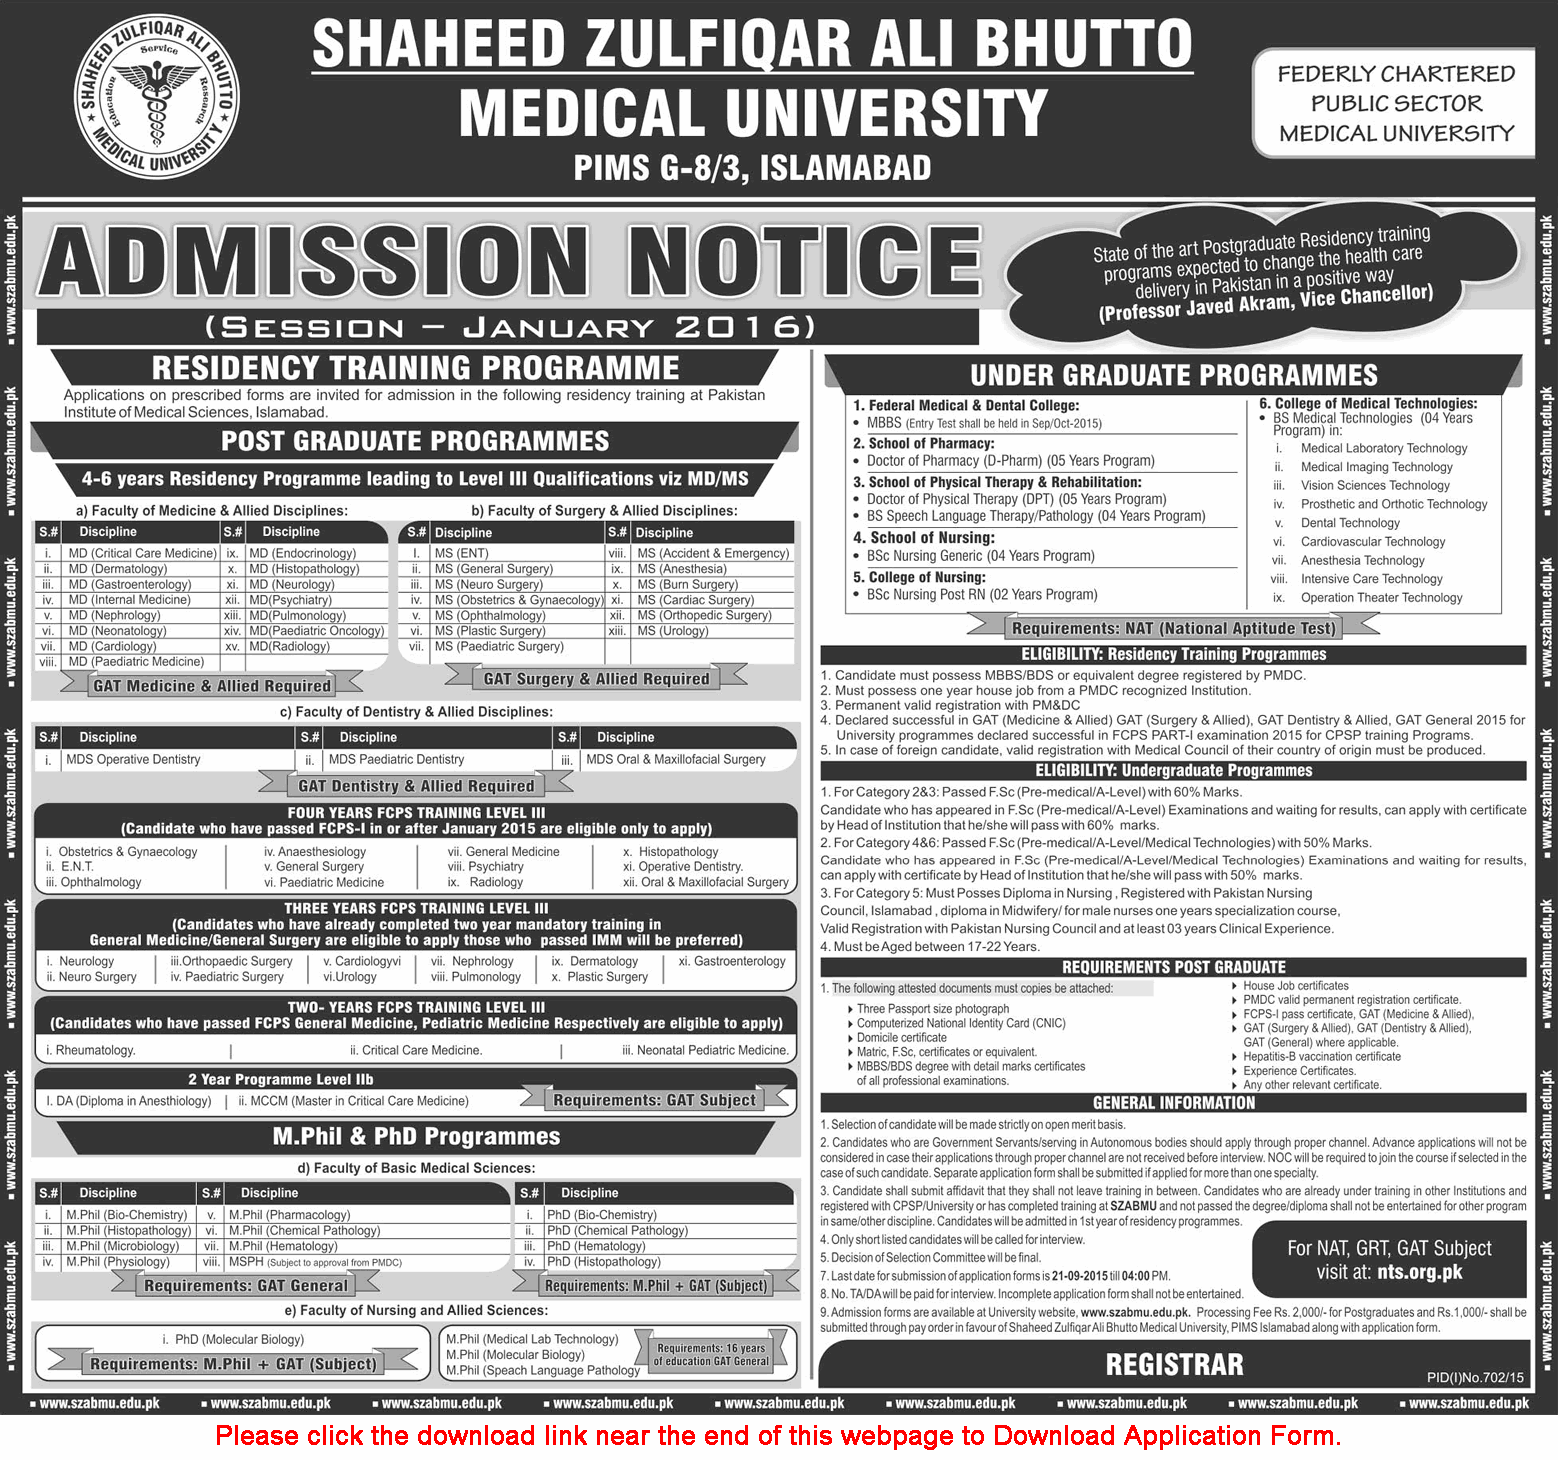 Shaheed Zulfiqar Ali Bhutto Medical University Islamabad Admissions 2015 / 2016 PIMS Application Form Download